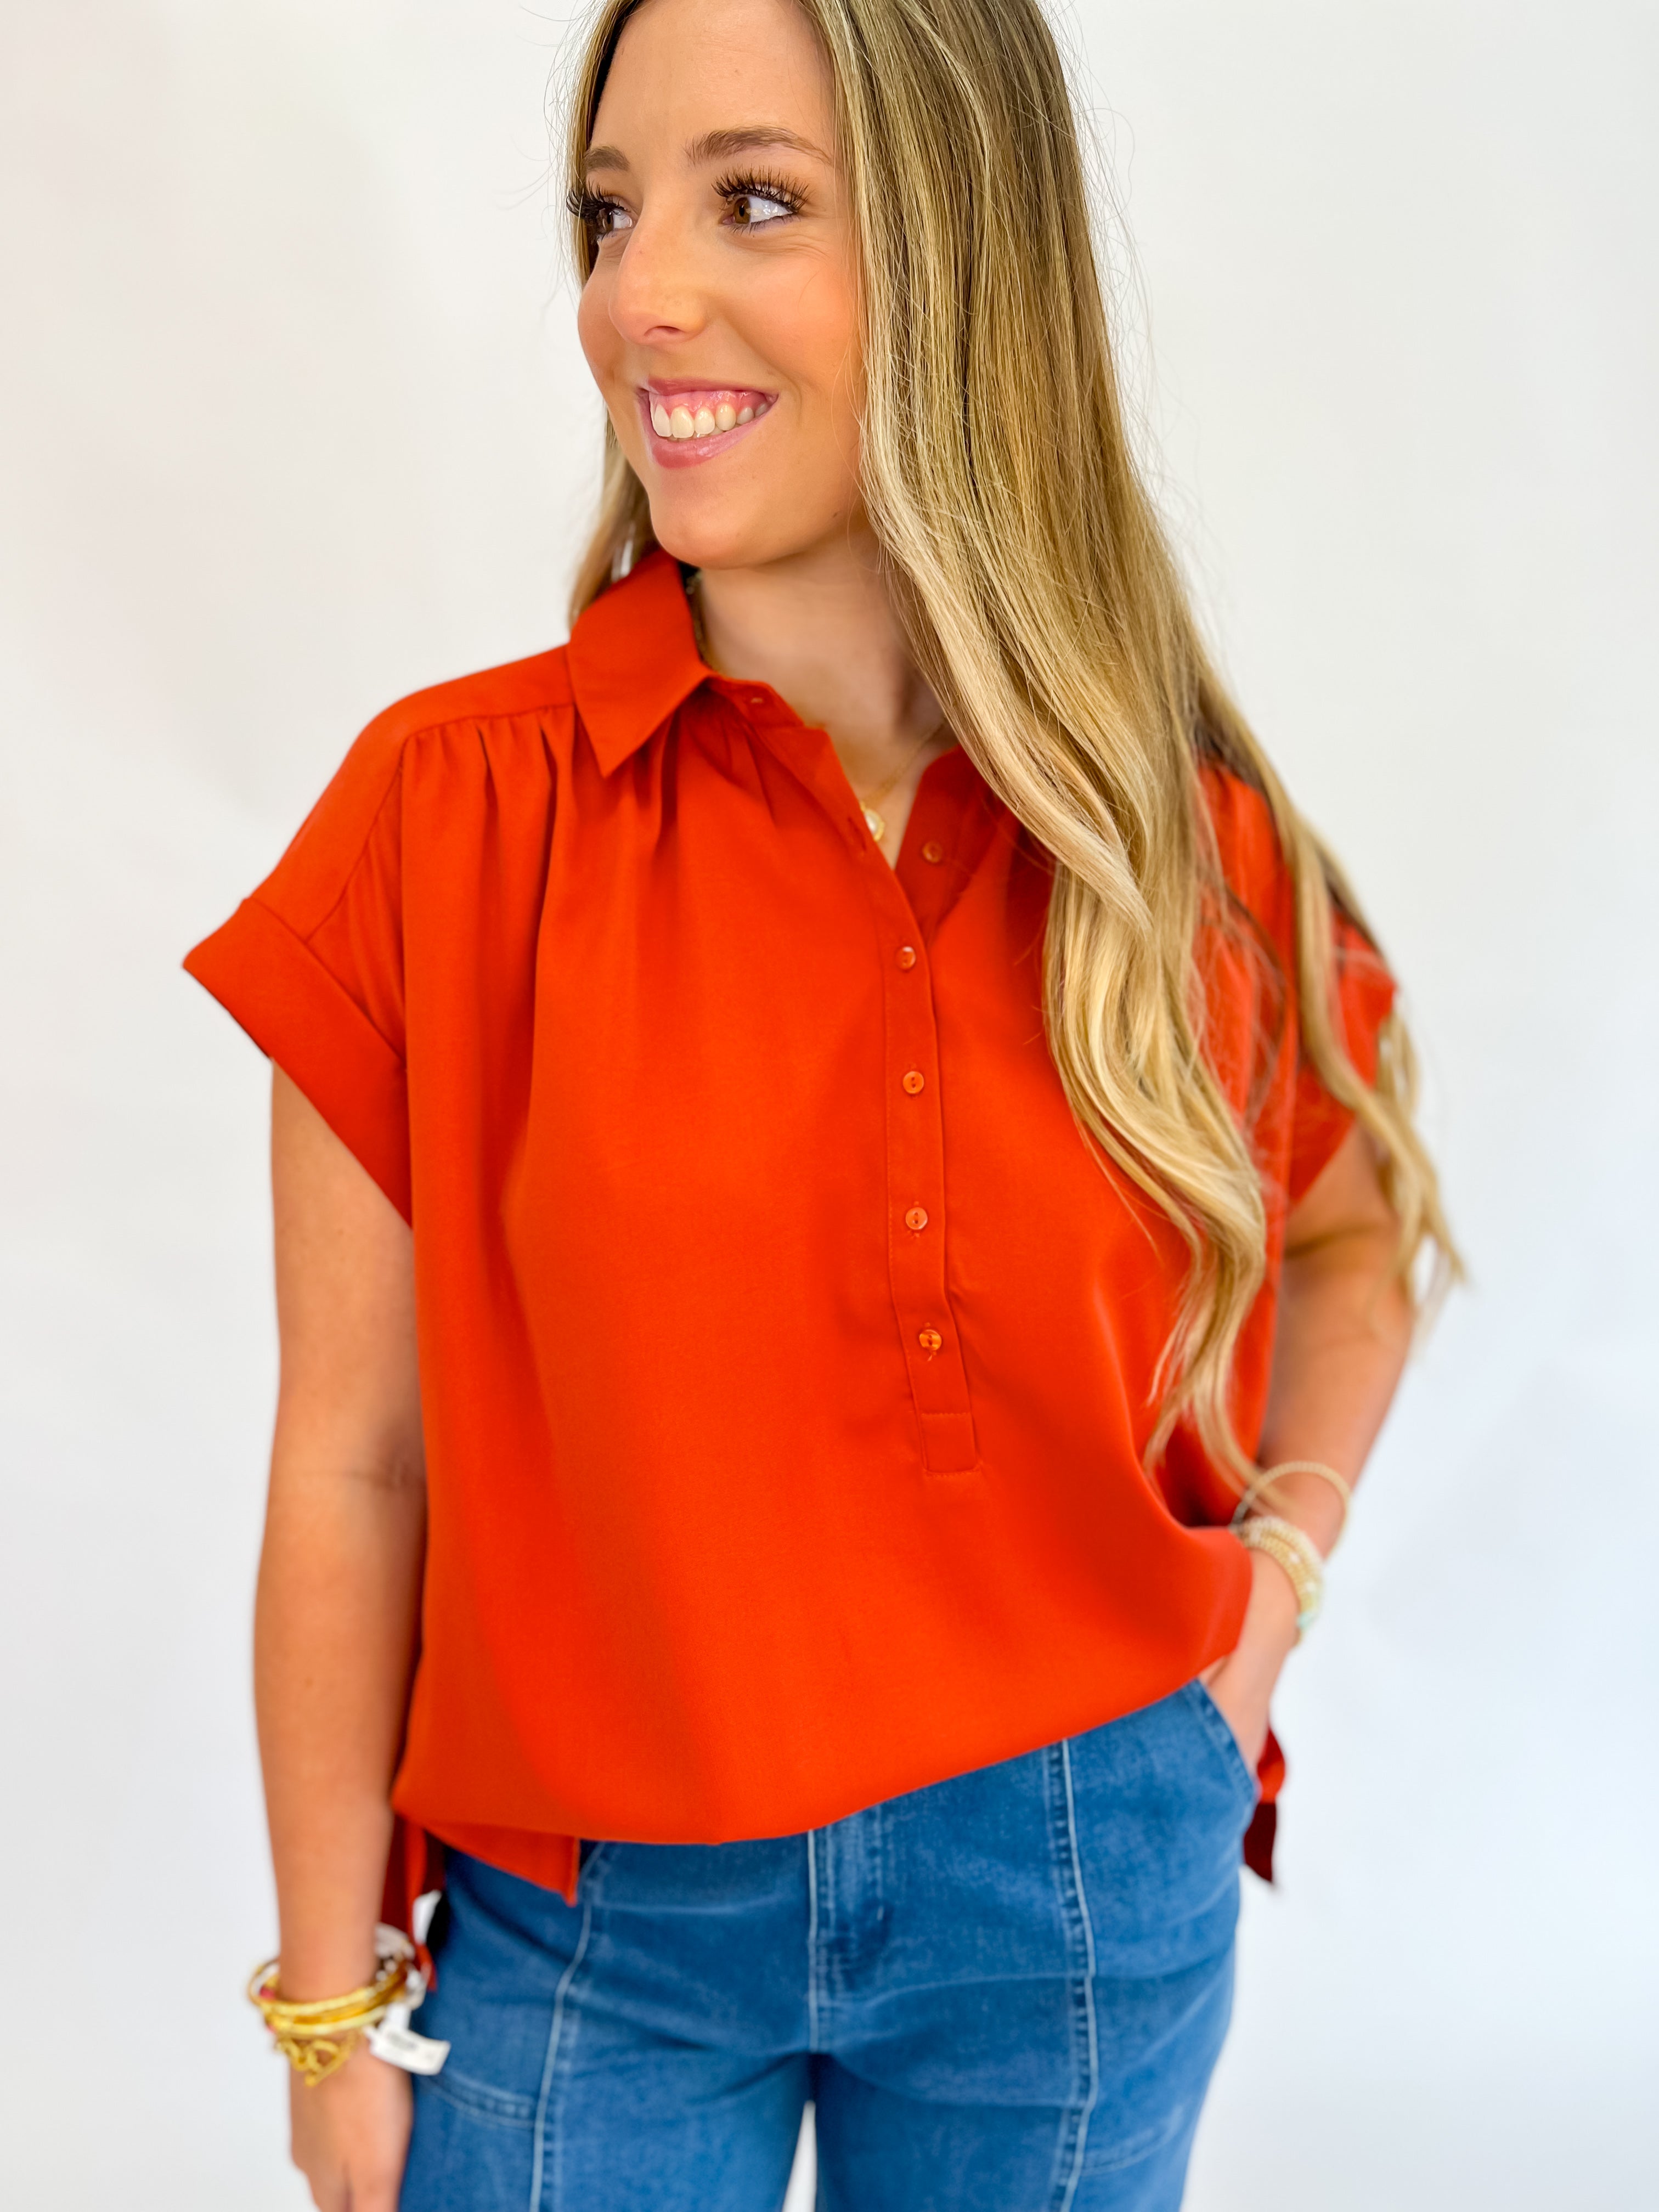 Cinnamon Collared Button Up Top